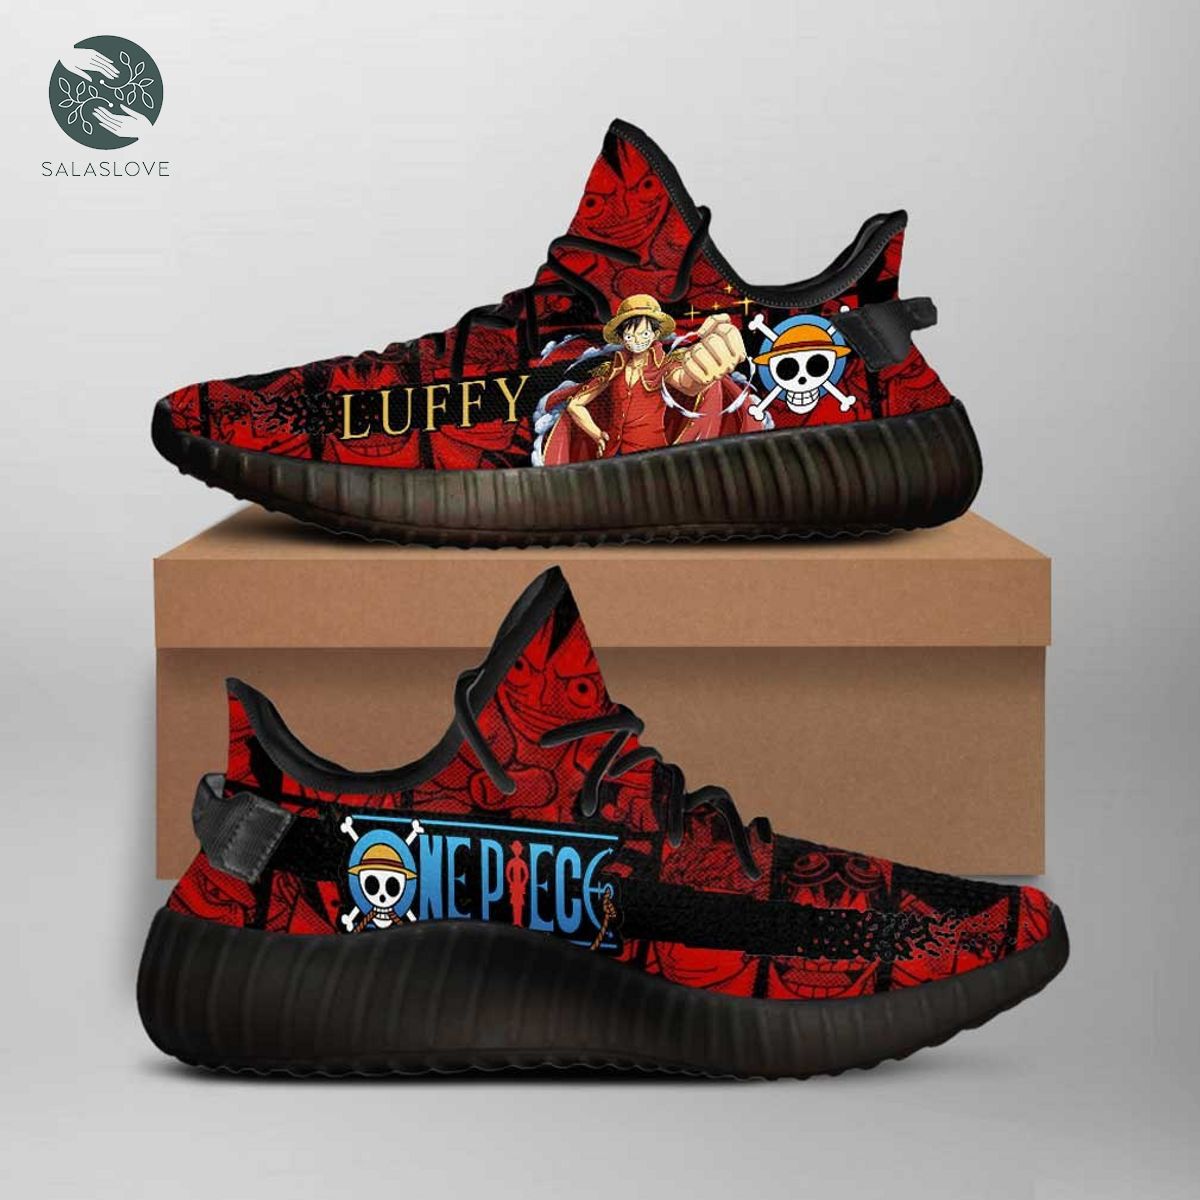 Luffy Yz Sneakers One Piece Anime Shoes Yeezy Sneakers Shoes